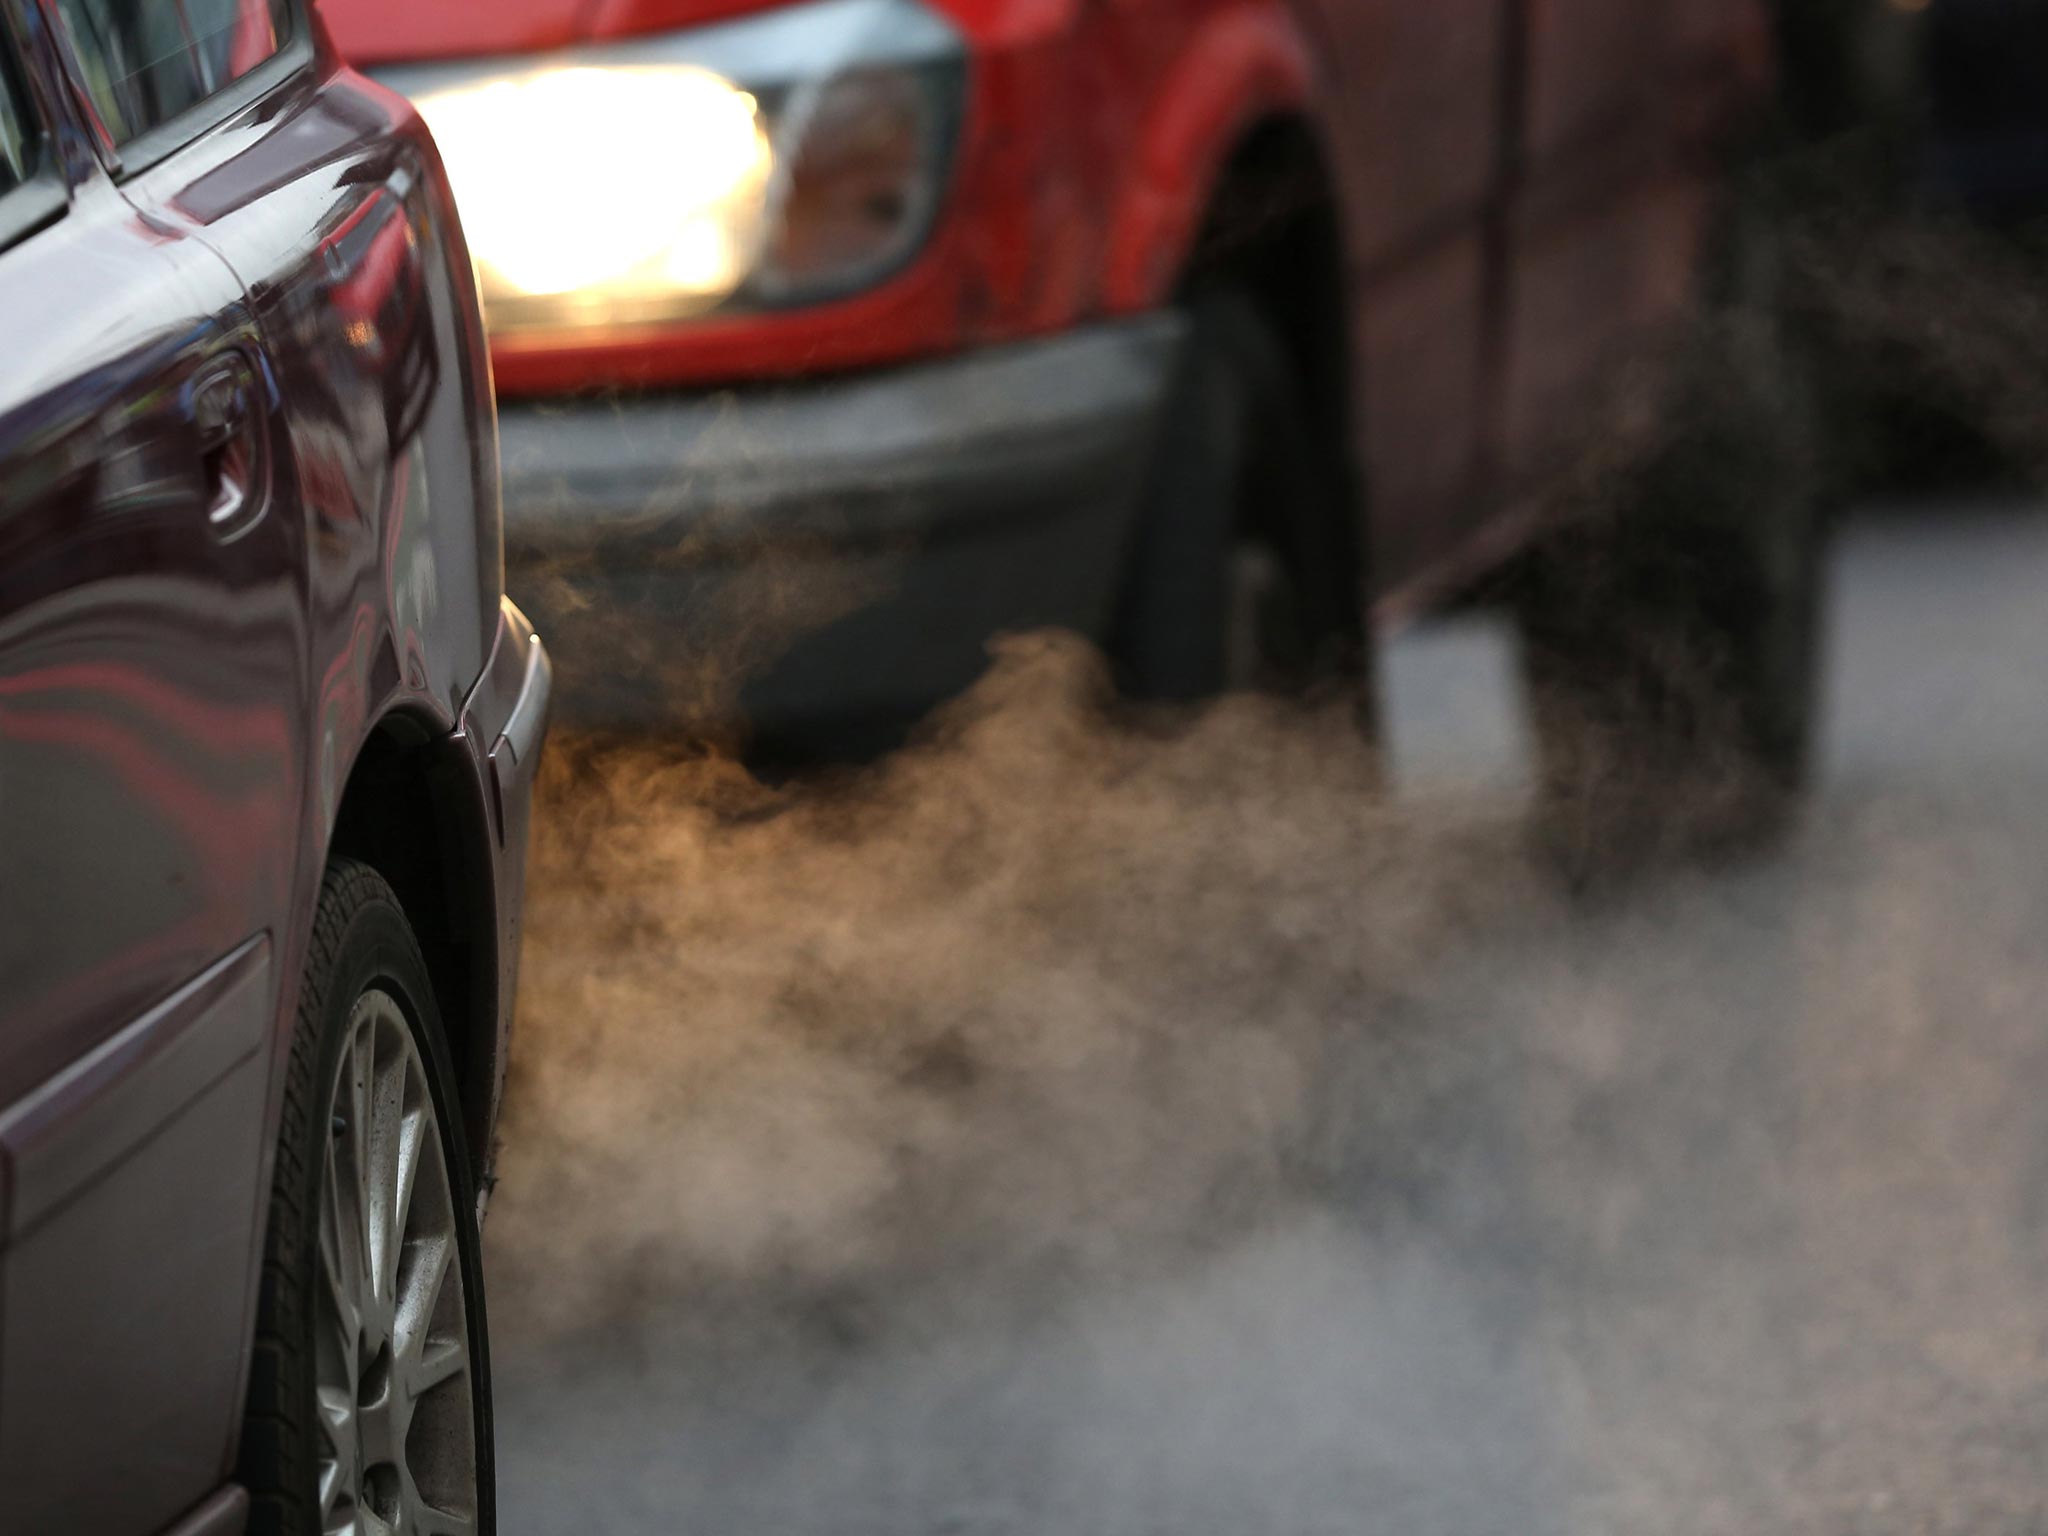 Cars release exhaust fumes in London